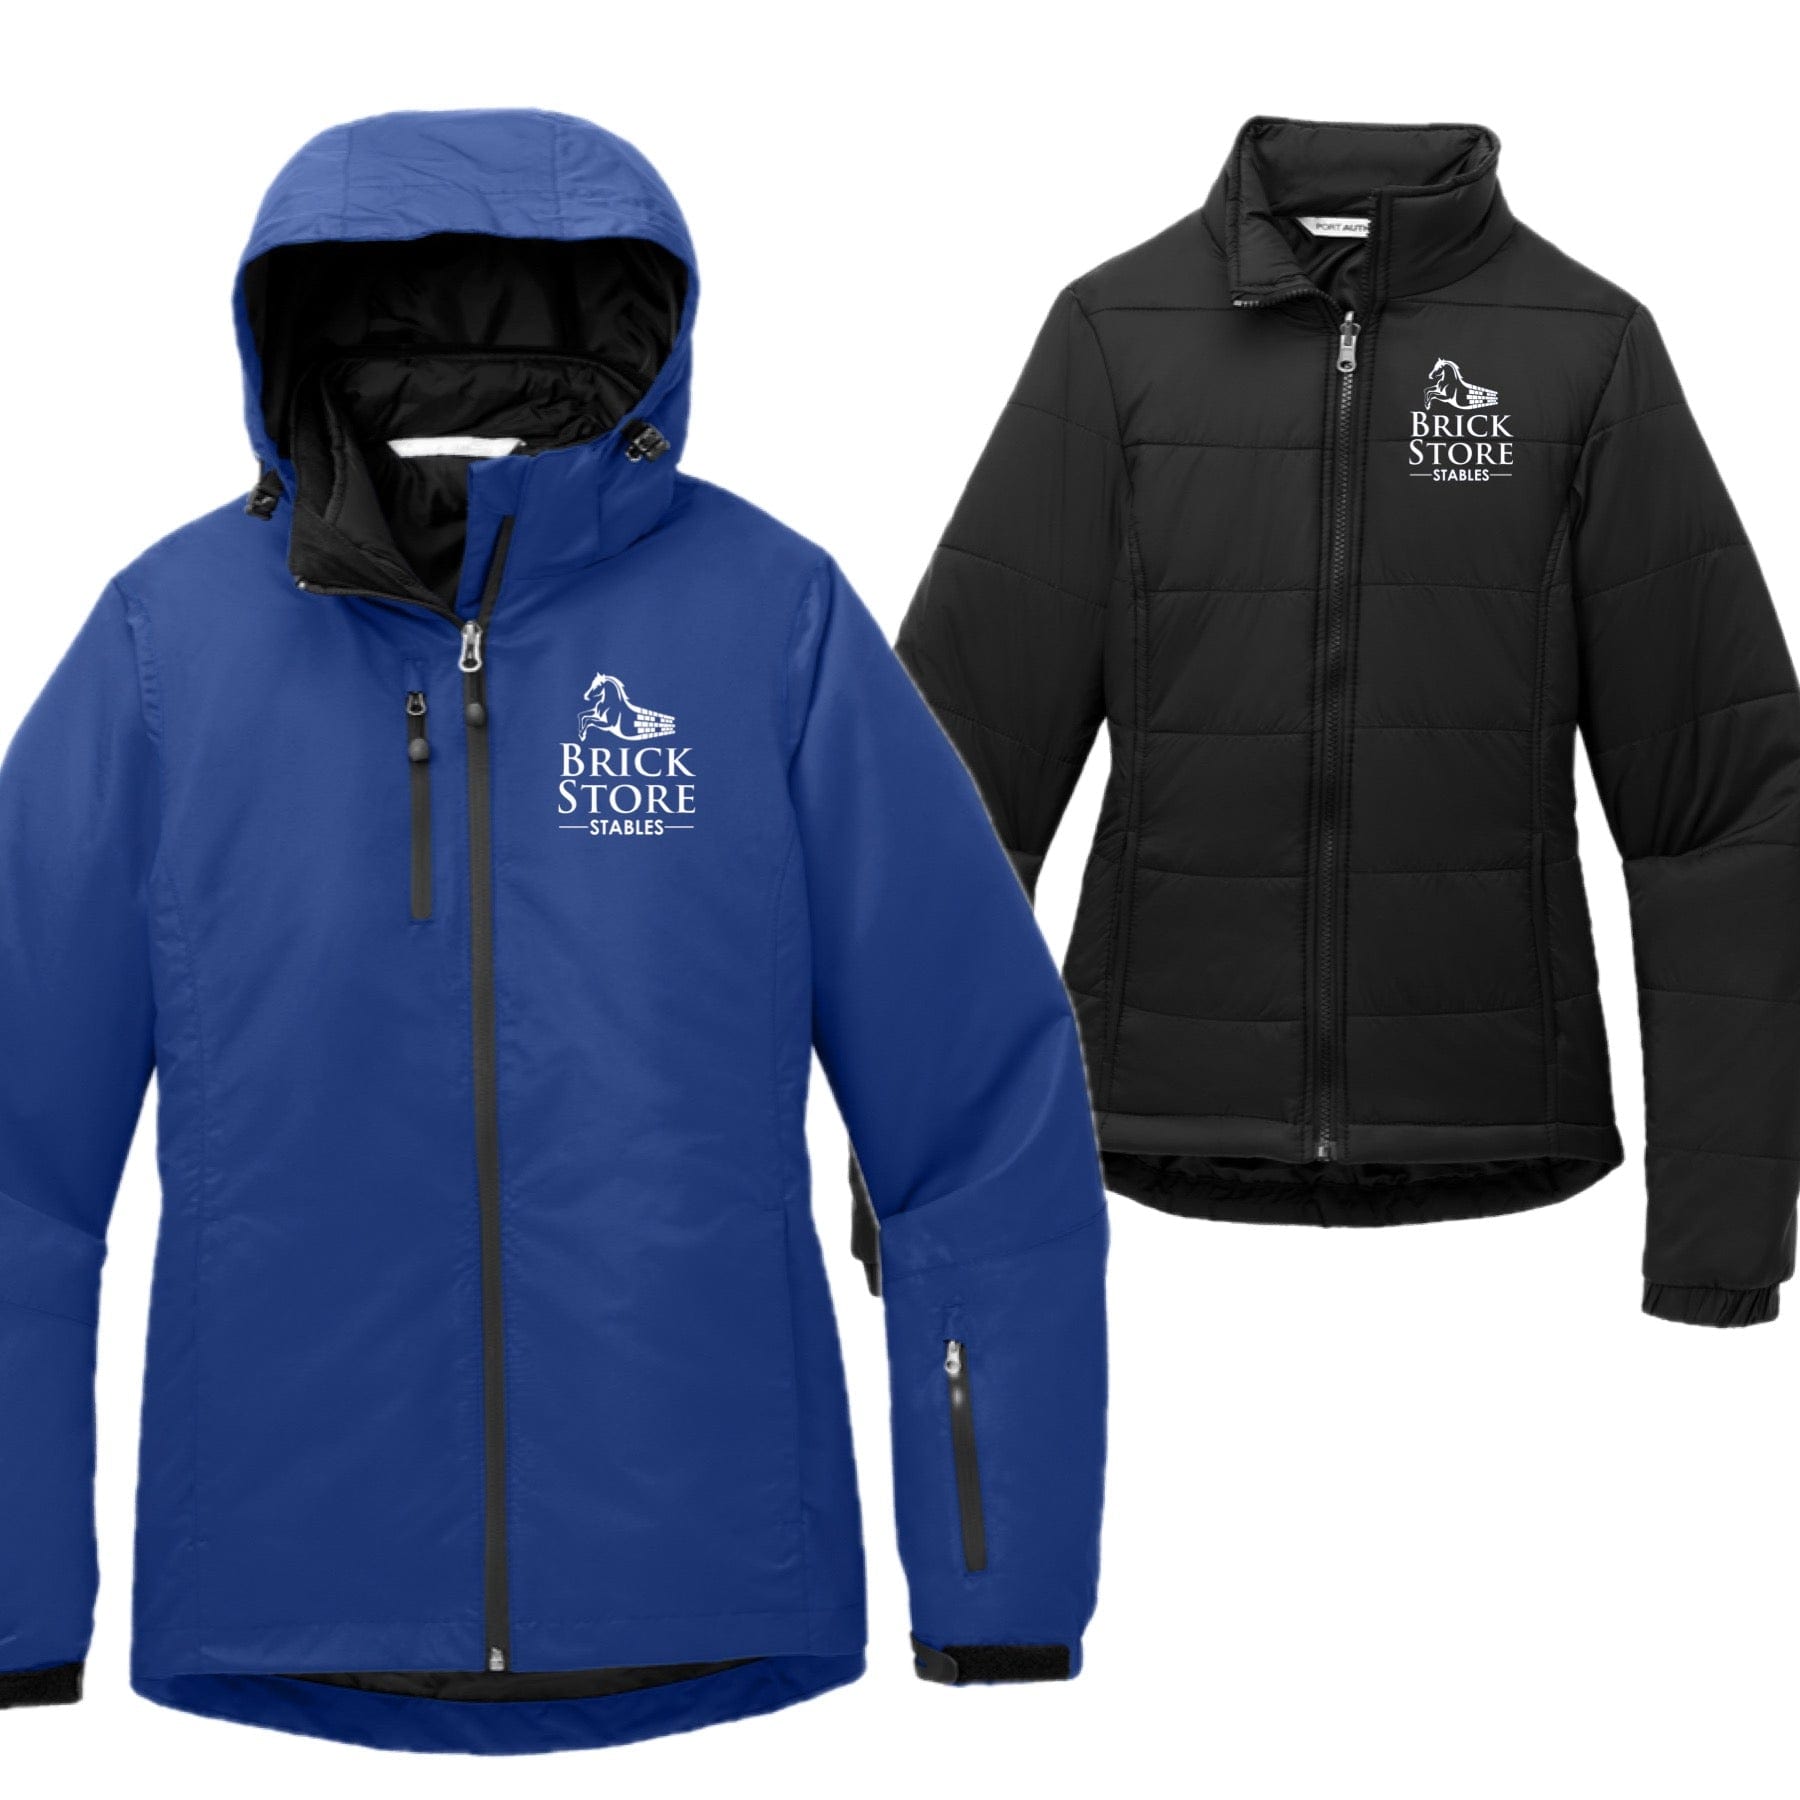 Equestrian Team Apparel Brick Store Stables 3 in 1 Jacket equestrian team apparel online tack store mobile tack store custom farm apparel custom show stable clothing equestrian lifestyle horse show clothing riding clothes horses equestrian tack store